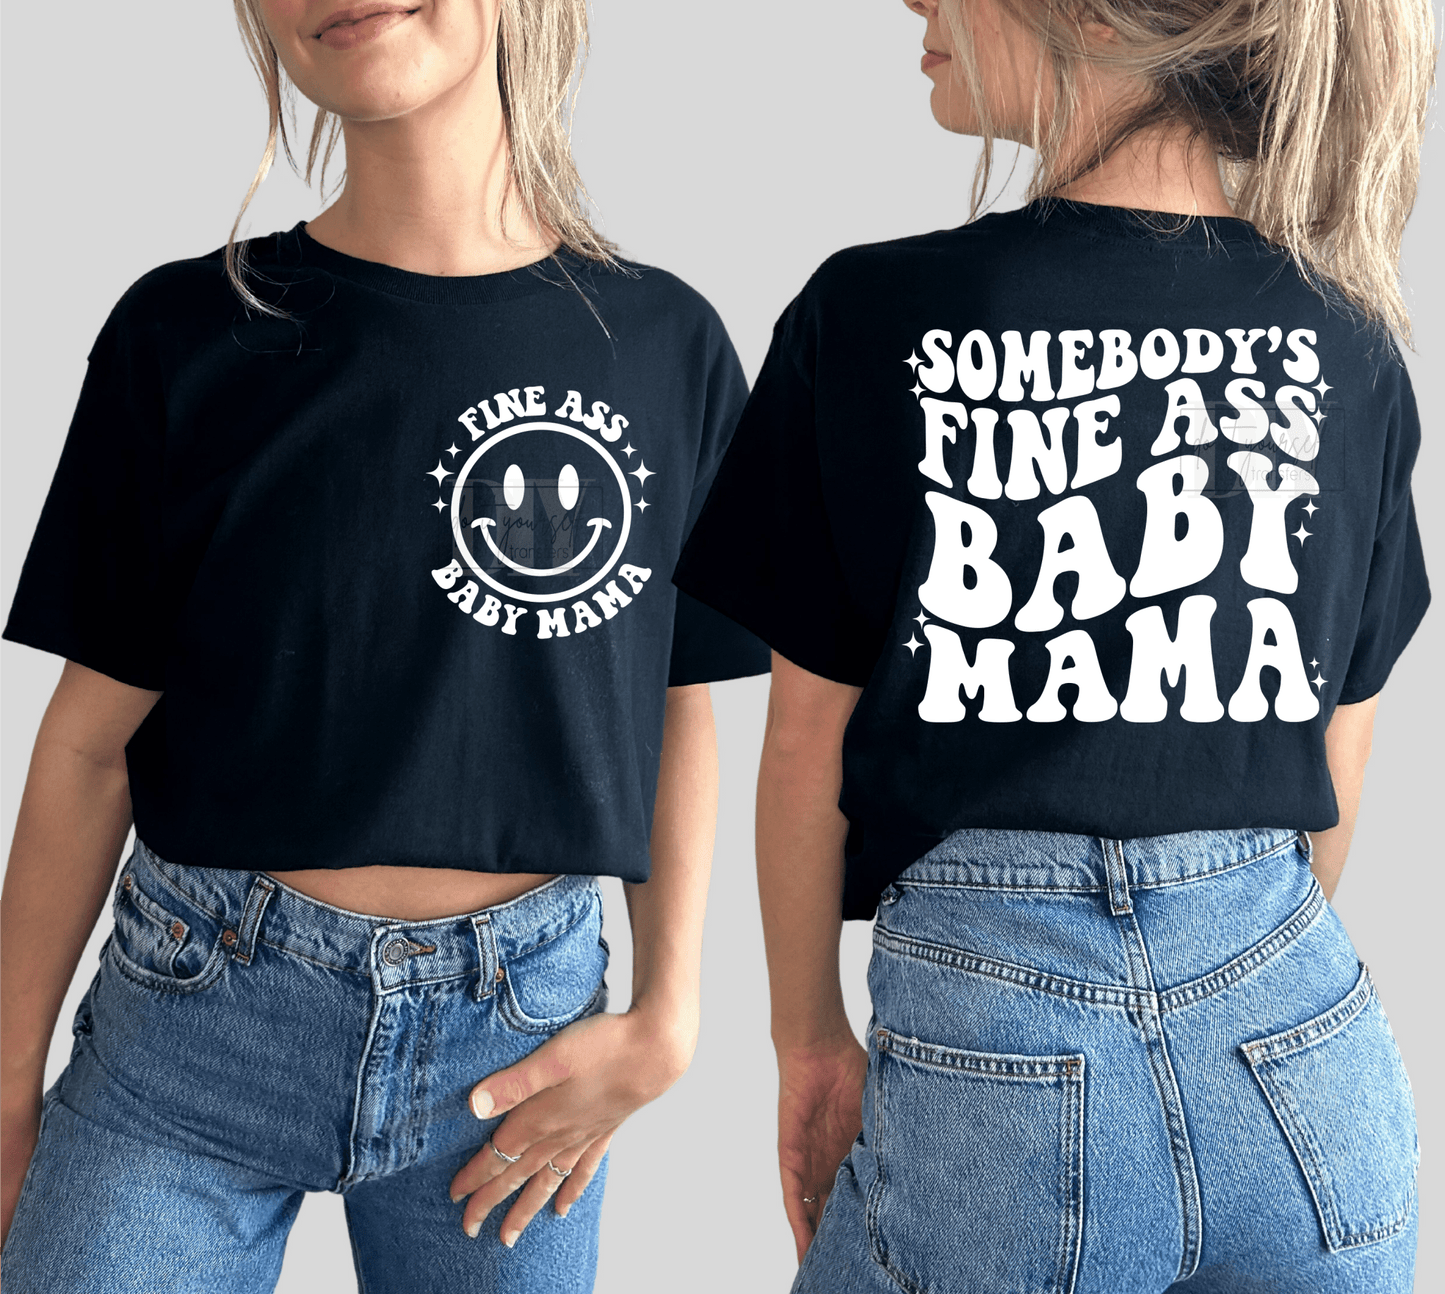 Somebody's Fine ass BABY MAMA SINGLE COLOR WHITE size ADULT FRONT BACK DTF TRANSFERPRINT TO ORDER - Do it yourself Transfers